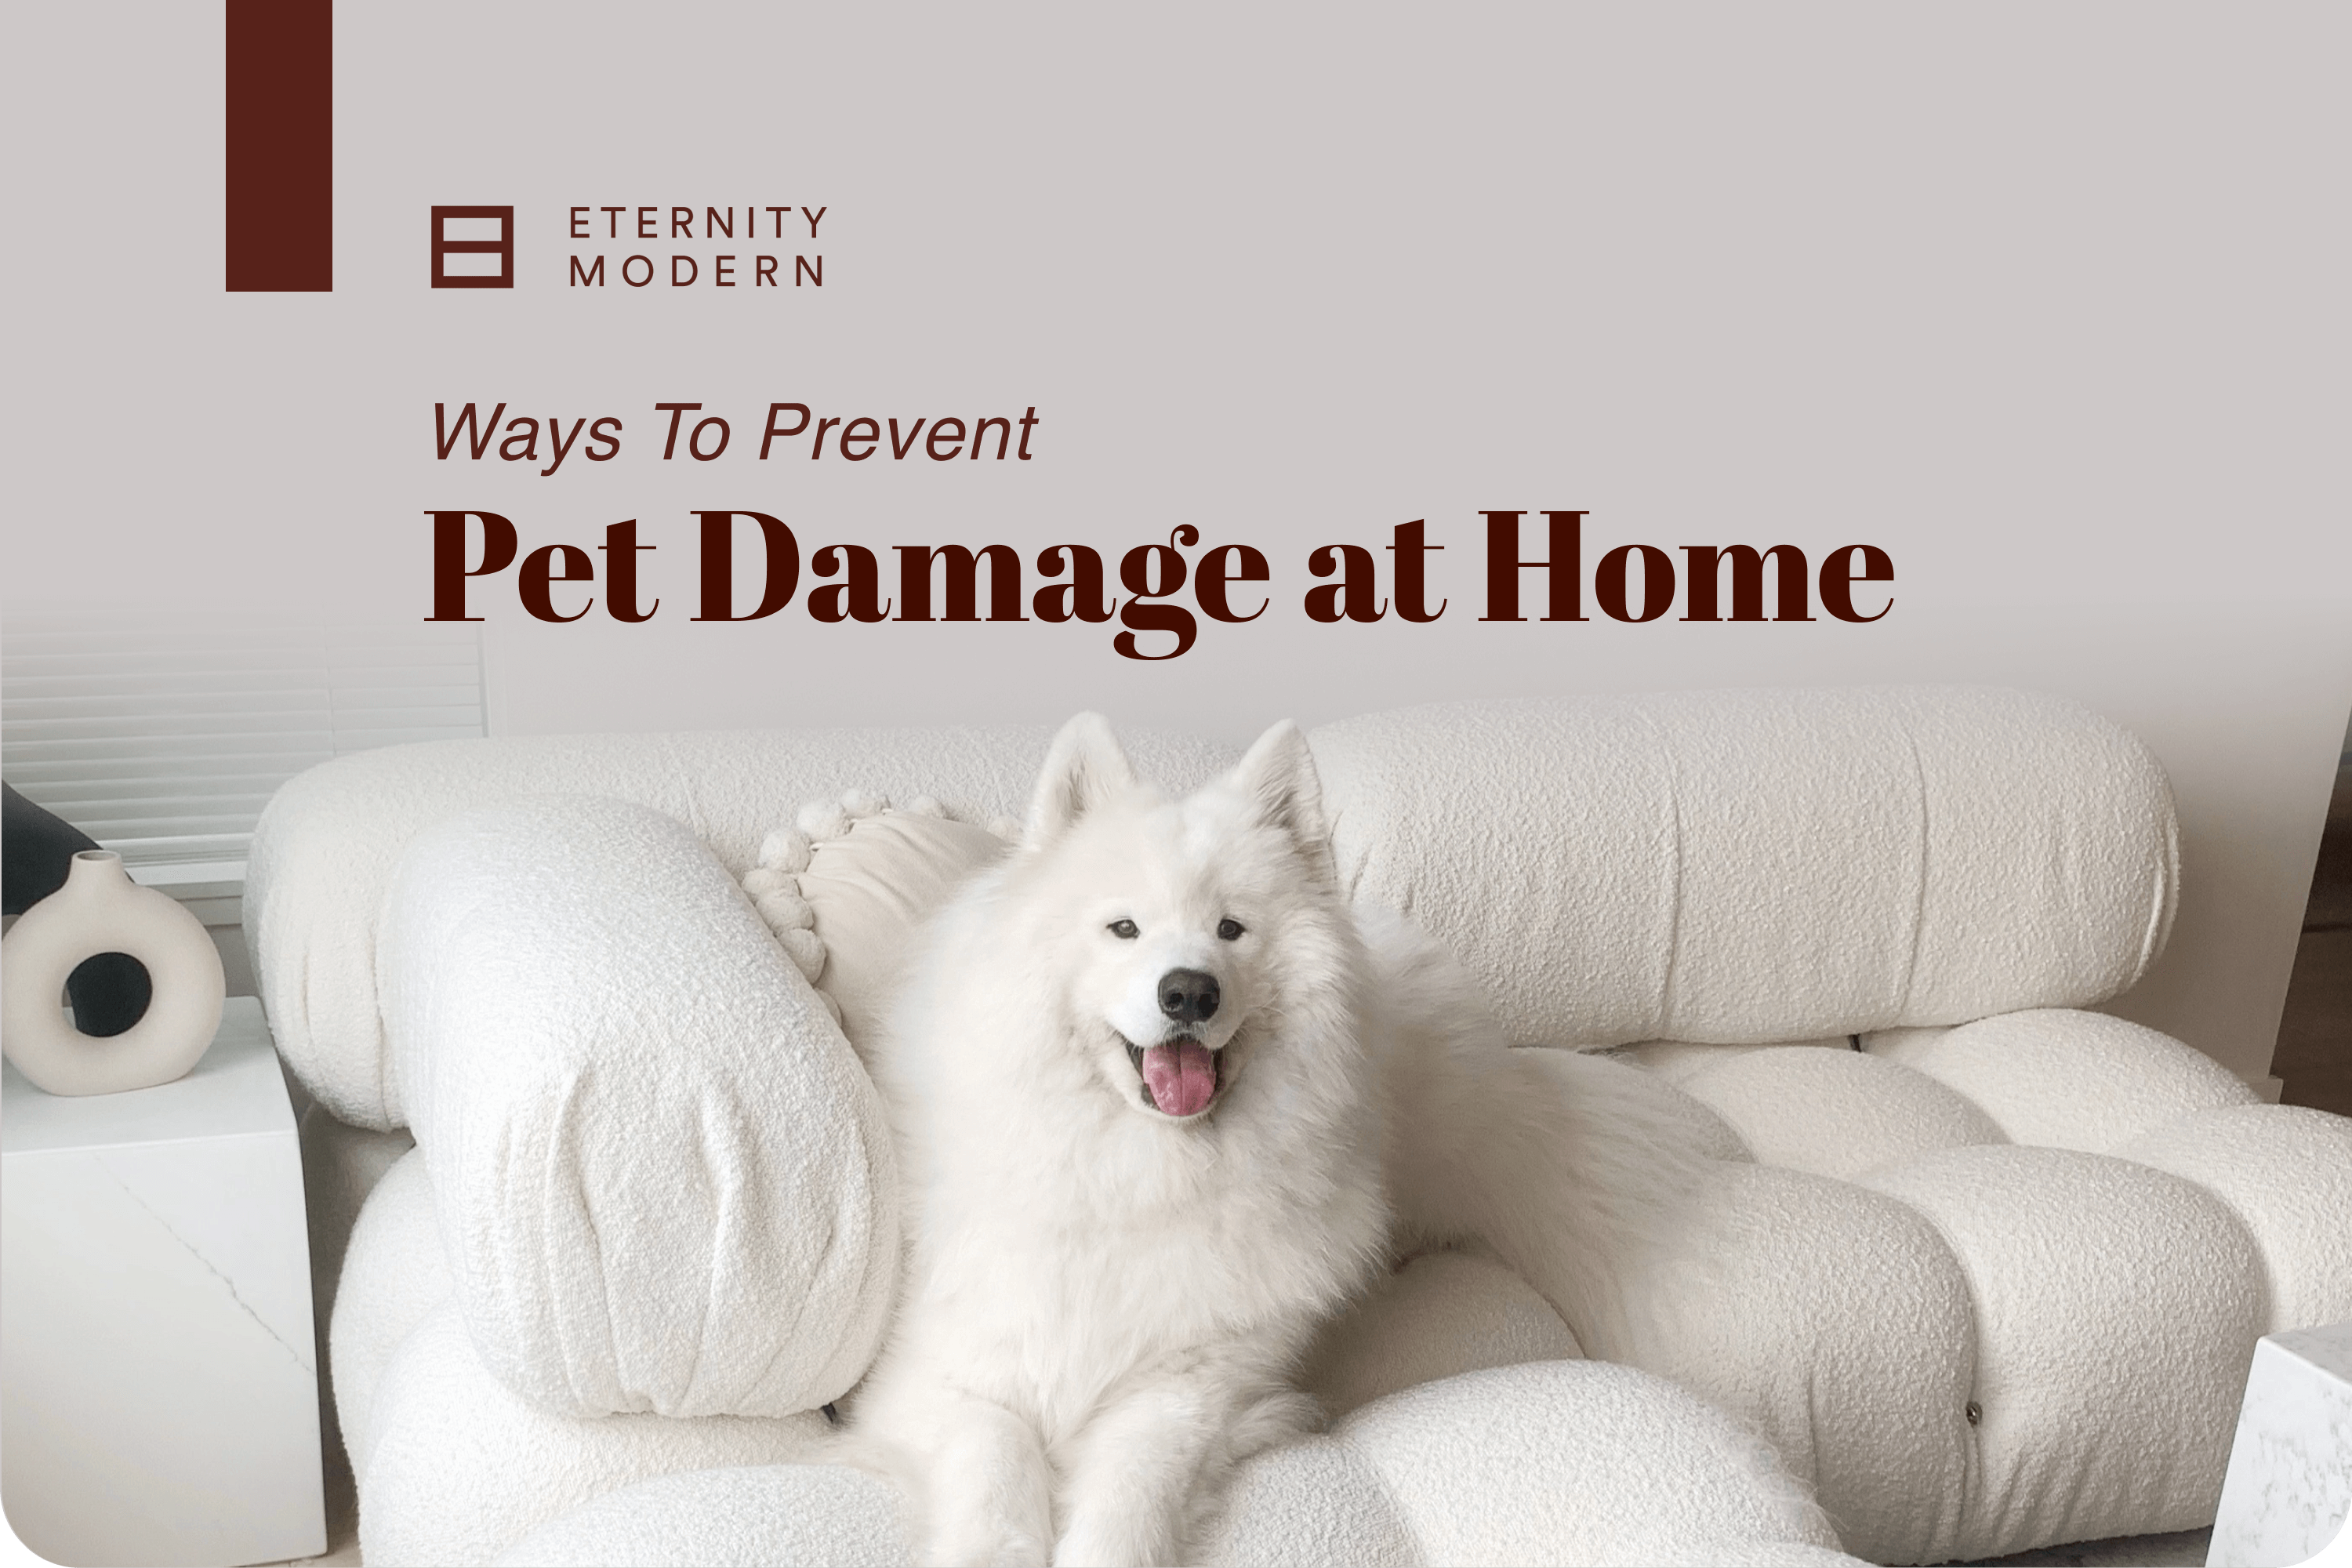 6 Ways Pets Destroy Your Home  Clever hacks to protect your property and sanity.